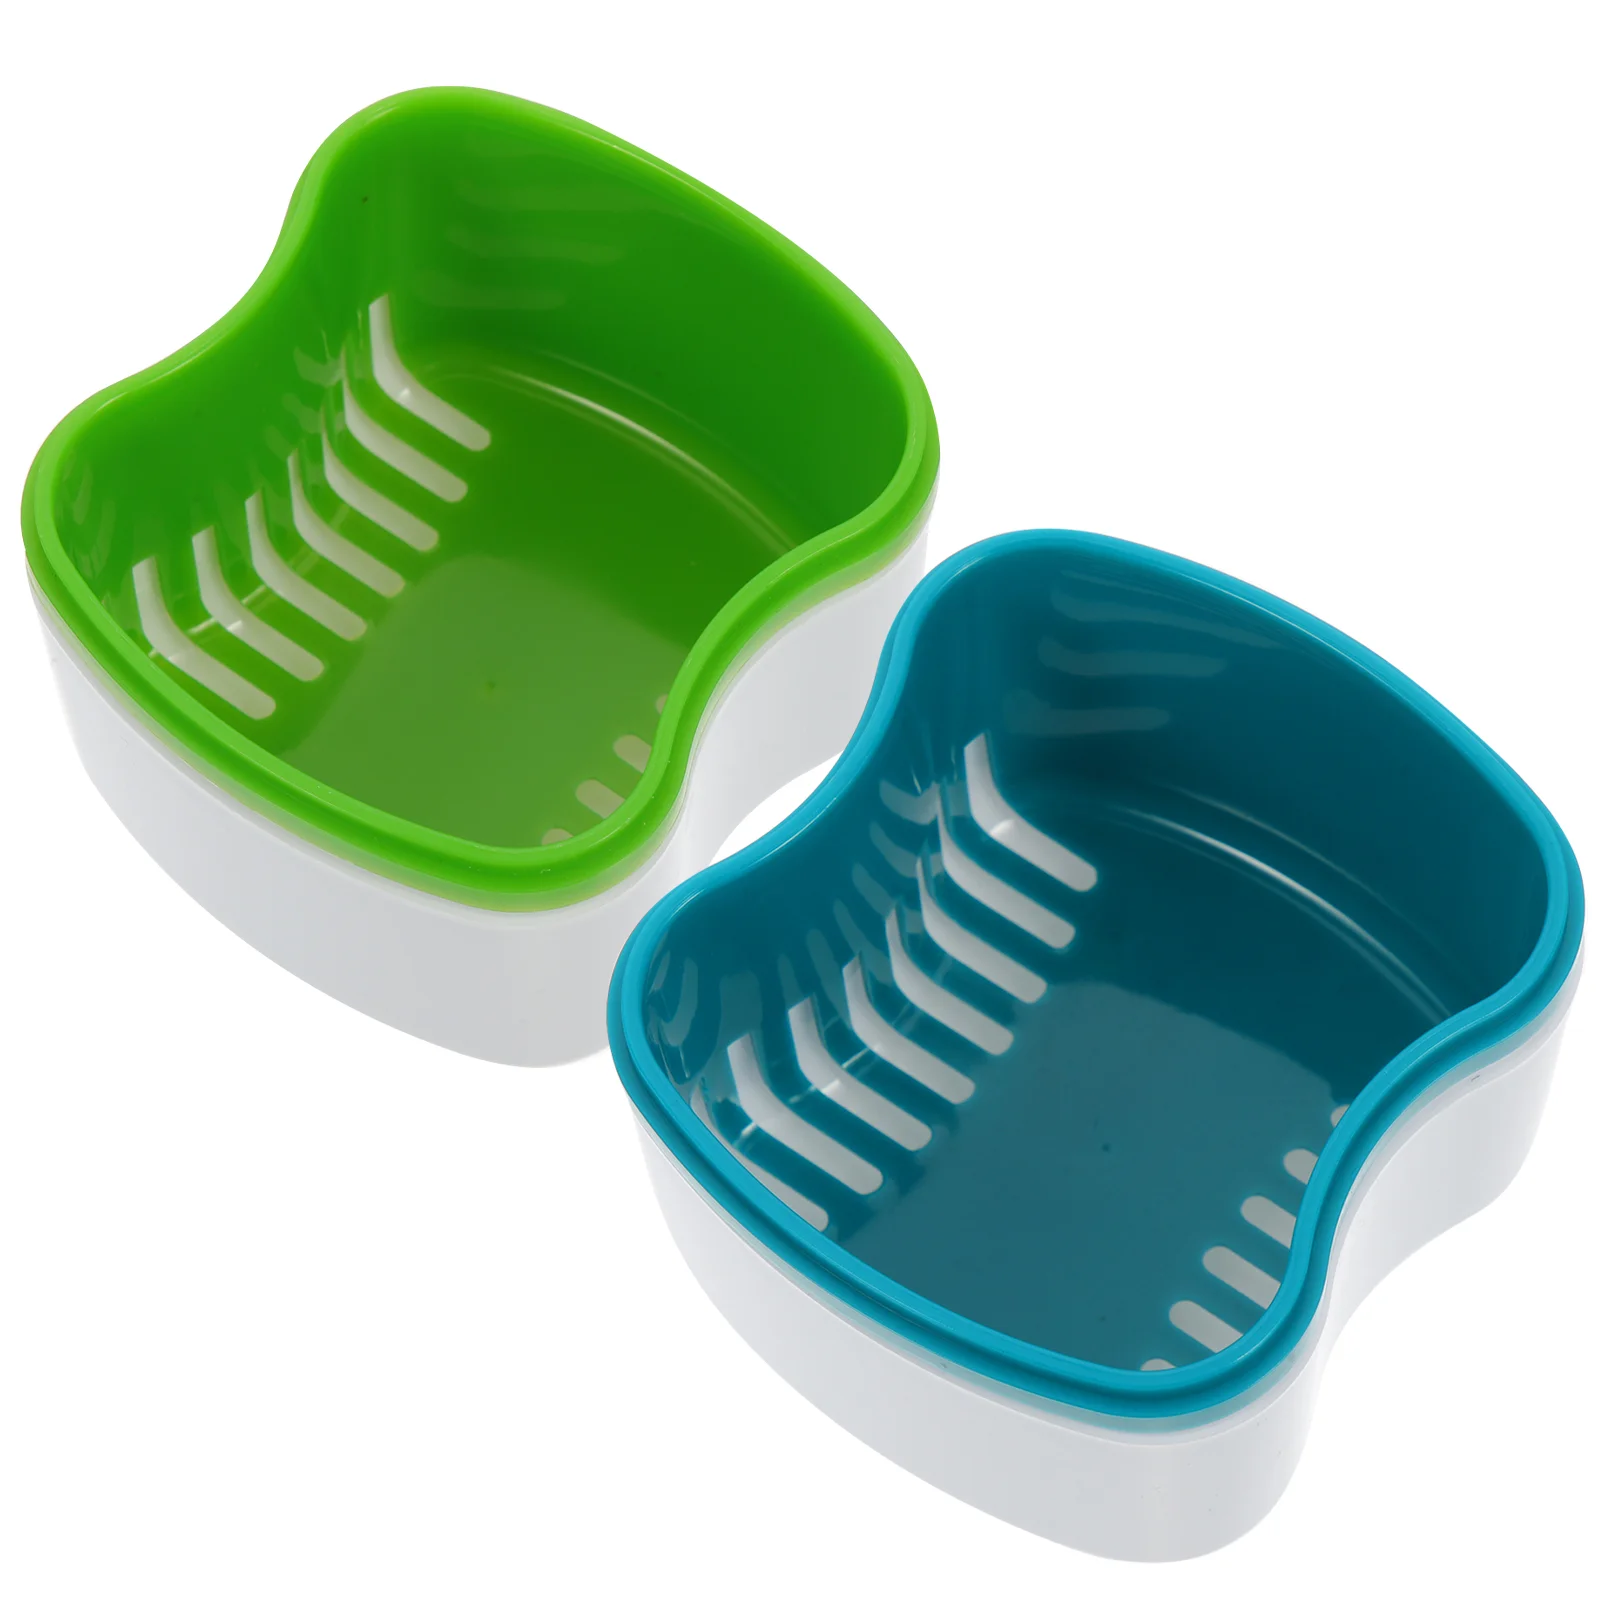 

2 Pcs Containers Lids Denture Case Retainer Suite Denture Cups Bath Teeth Cups Lid Fake Tooth Cup Travel